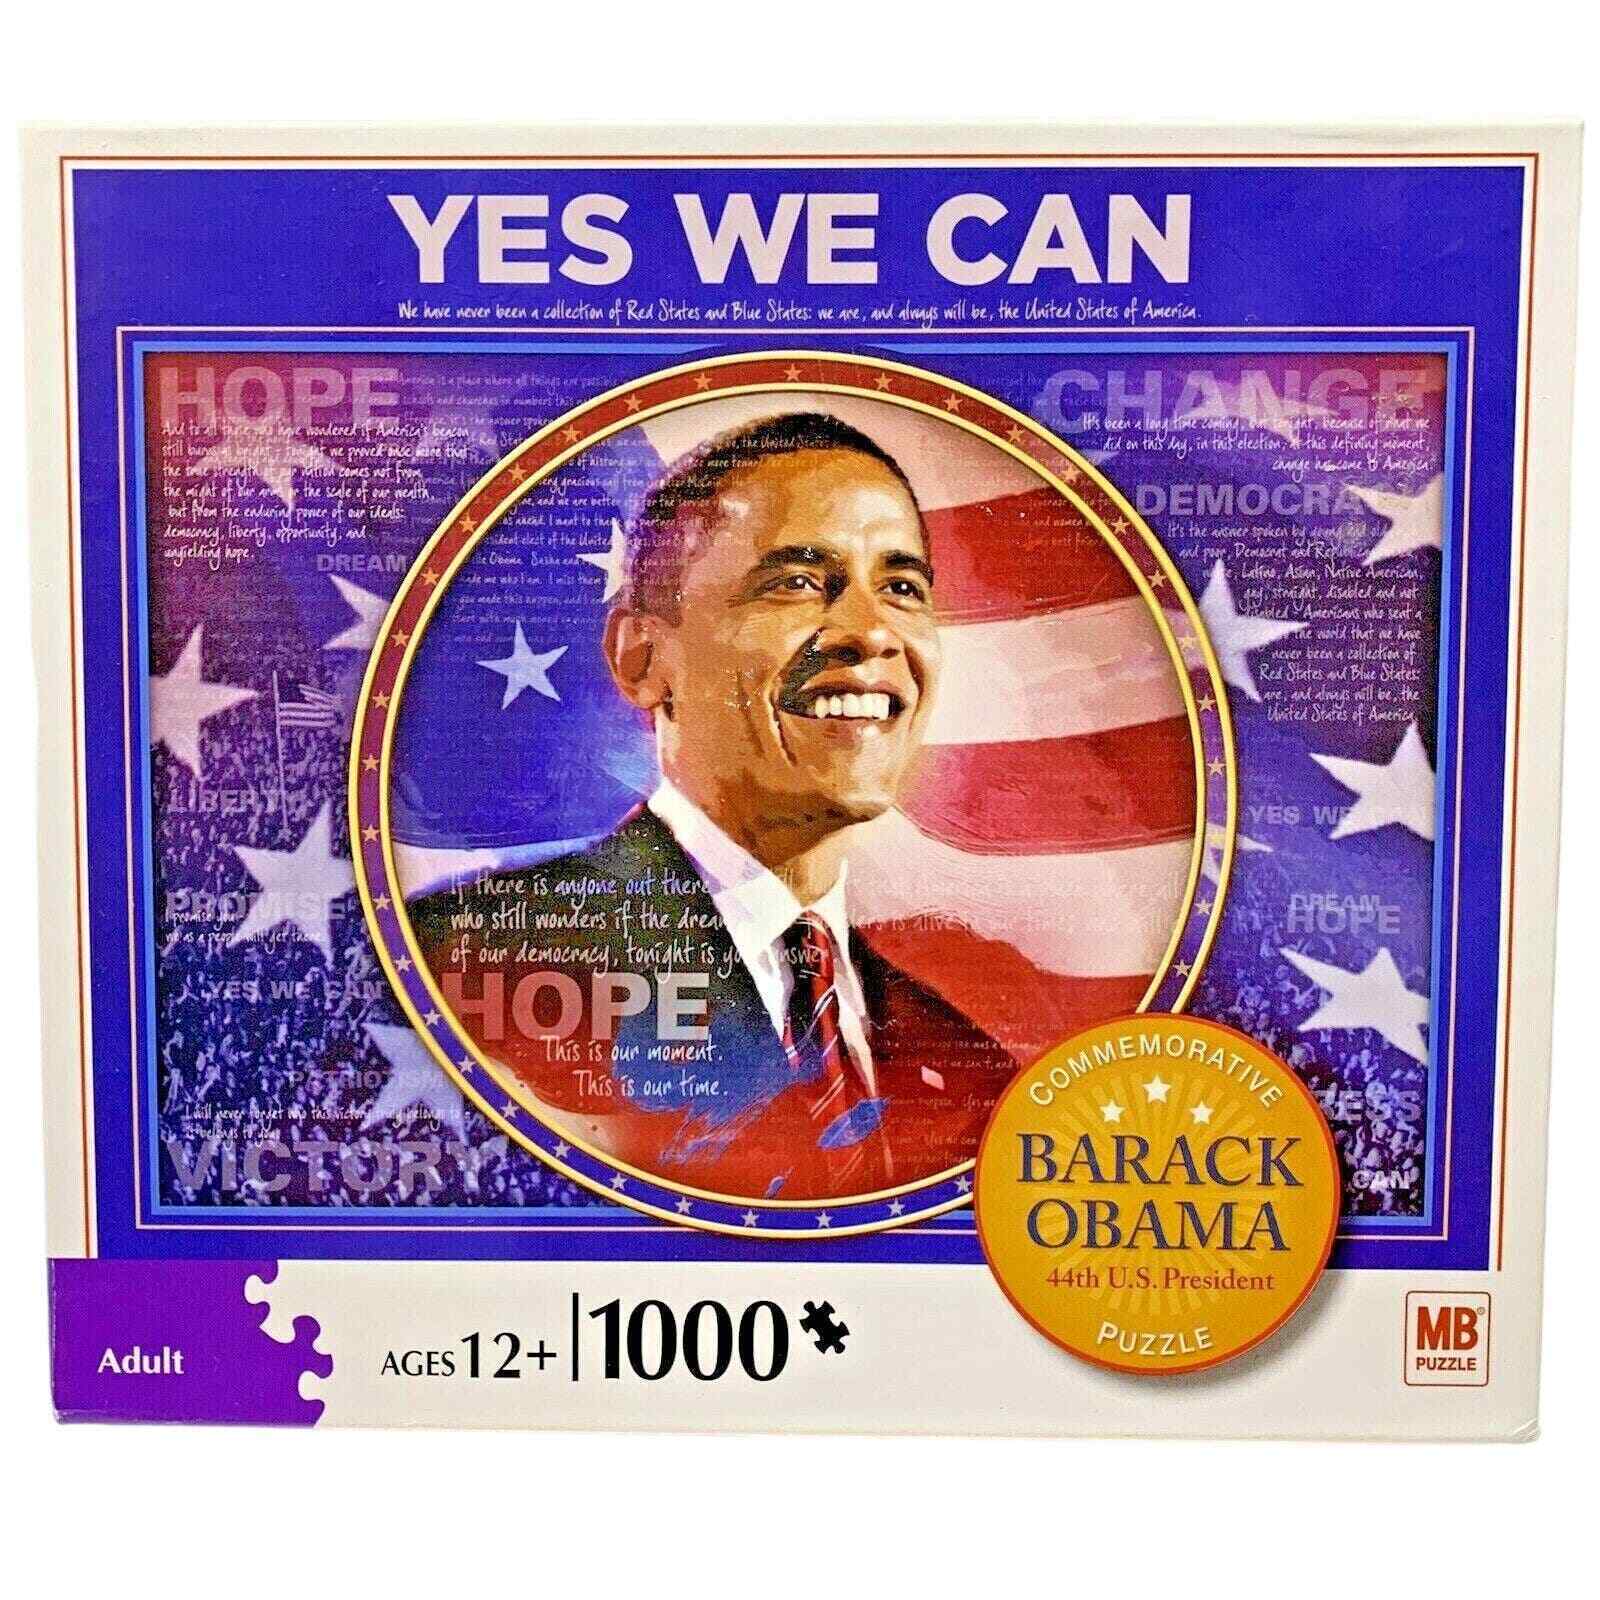 Barrack Obama Commemorative 1000 Piece Jigsaw Puzzle 20x26 Yes We Can 2008 NEW - $16.95